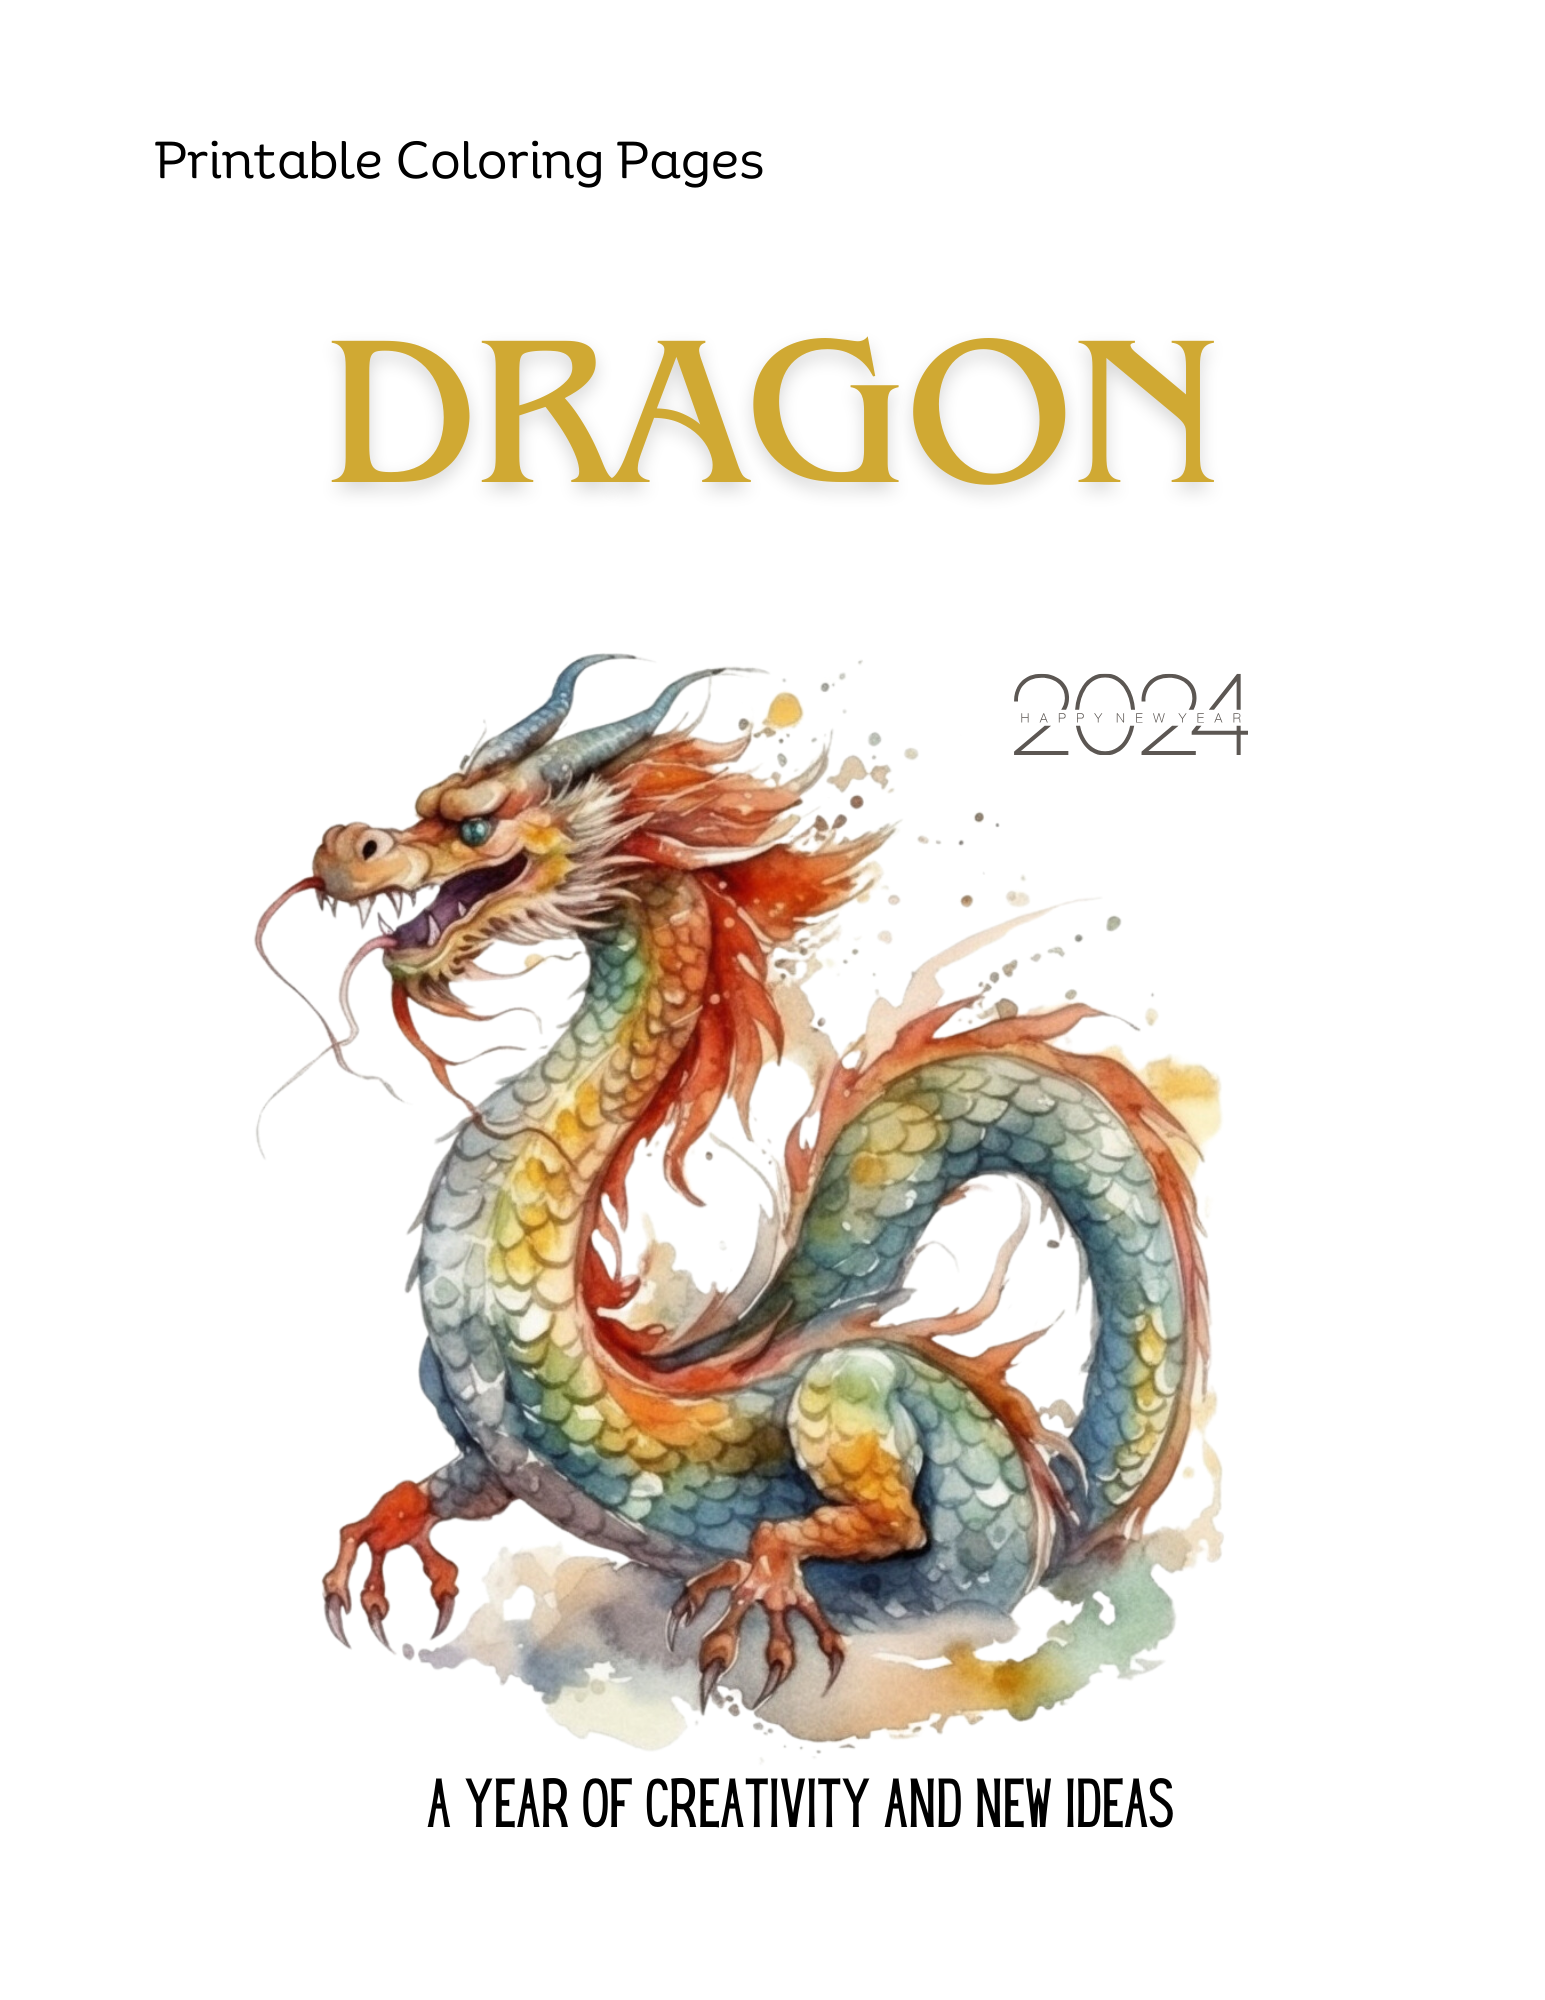 Printable (Digital) Dragon Coloring Pages: New Year 2024 Dragon Coloring Collection